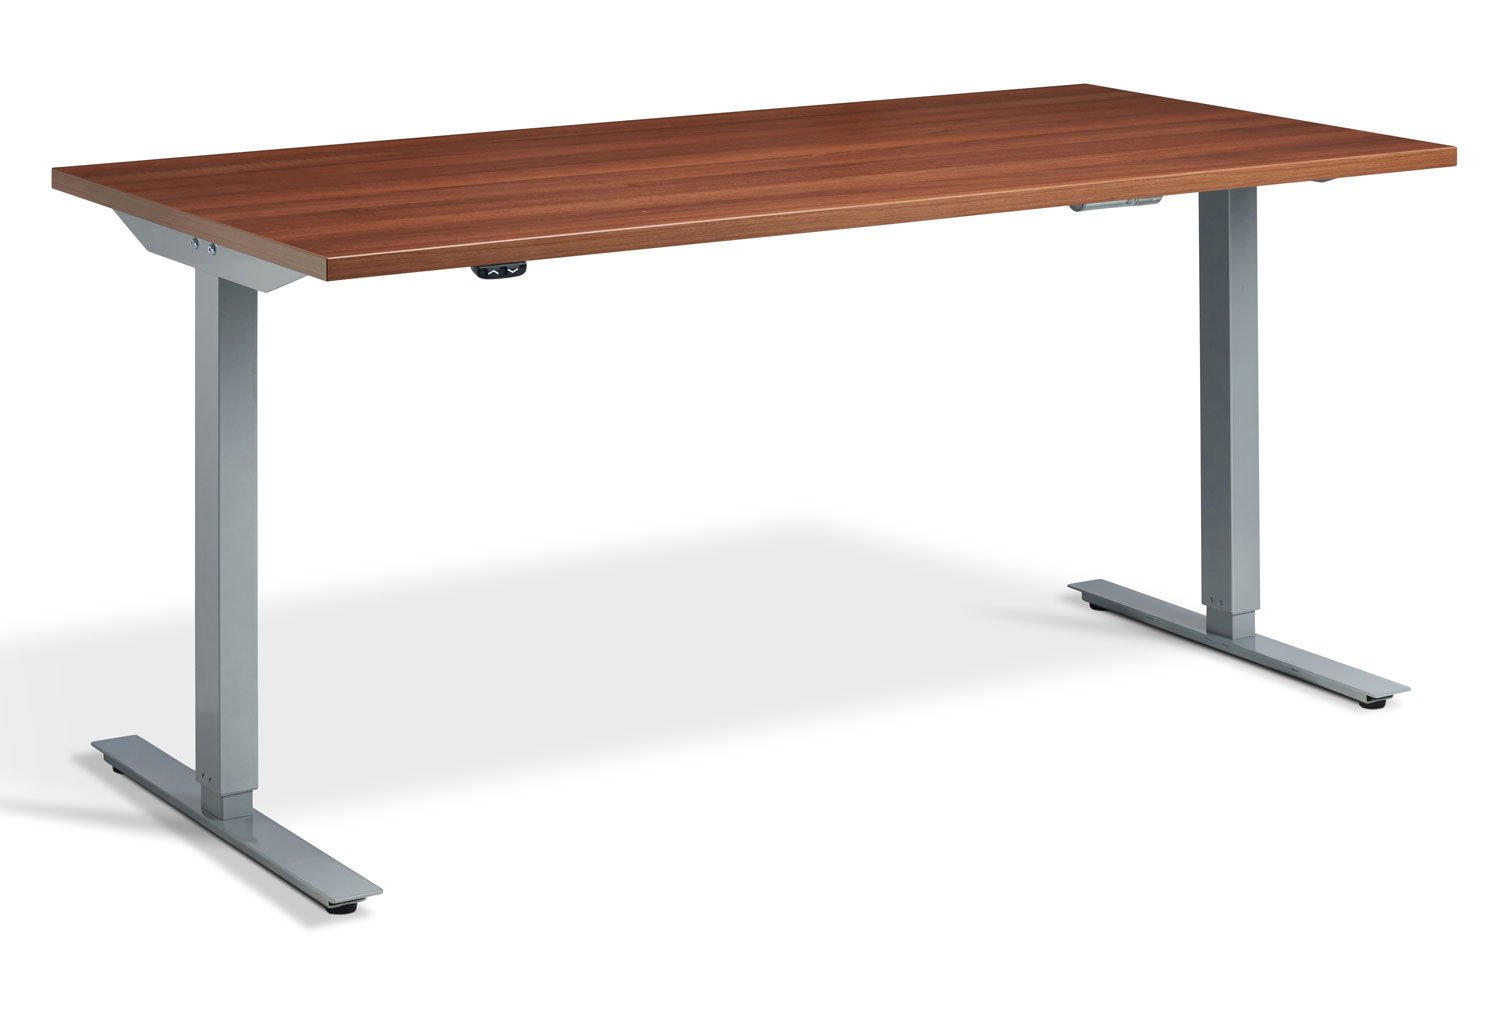 Calgary Dual Motor Height Adjustable Office Desk, 160wx80dx70-120h (cm), Silver Frame, Walnut, Express Delivery